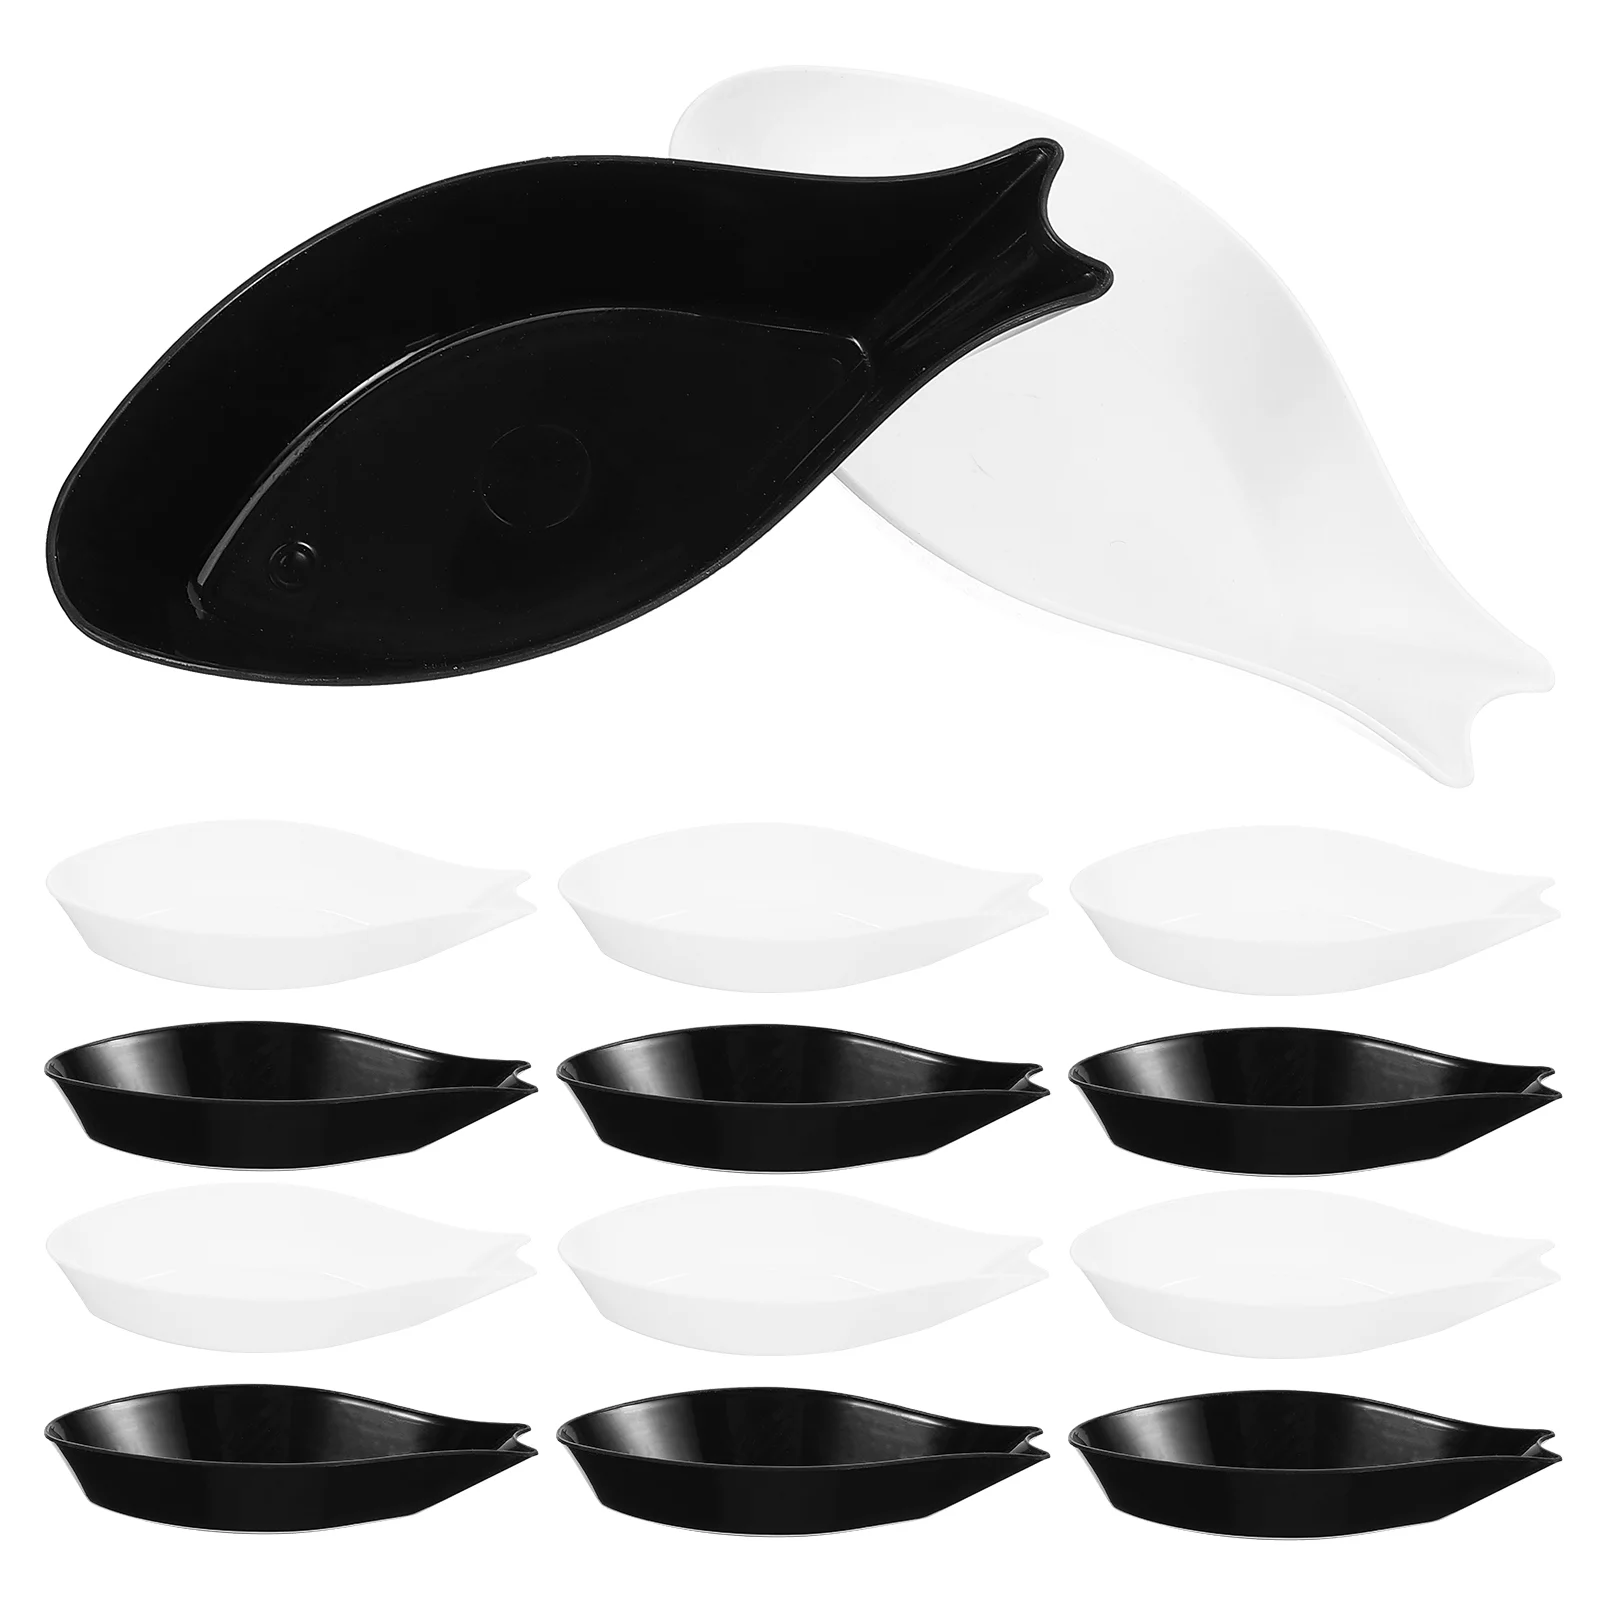 20pcs Small Appetizer Bowls Durable Barbecue Dipping Tray Convenient Seasoning Bowls Small Dishes